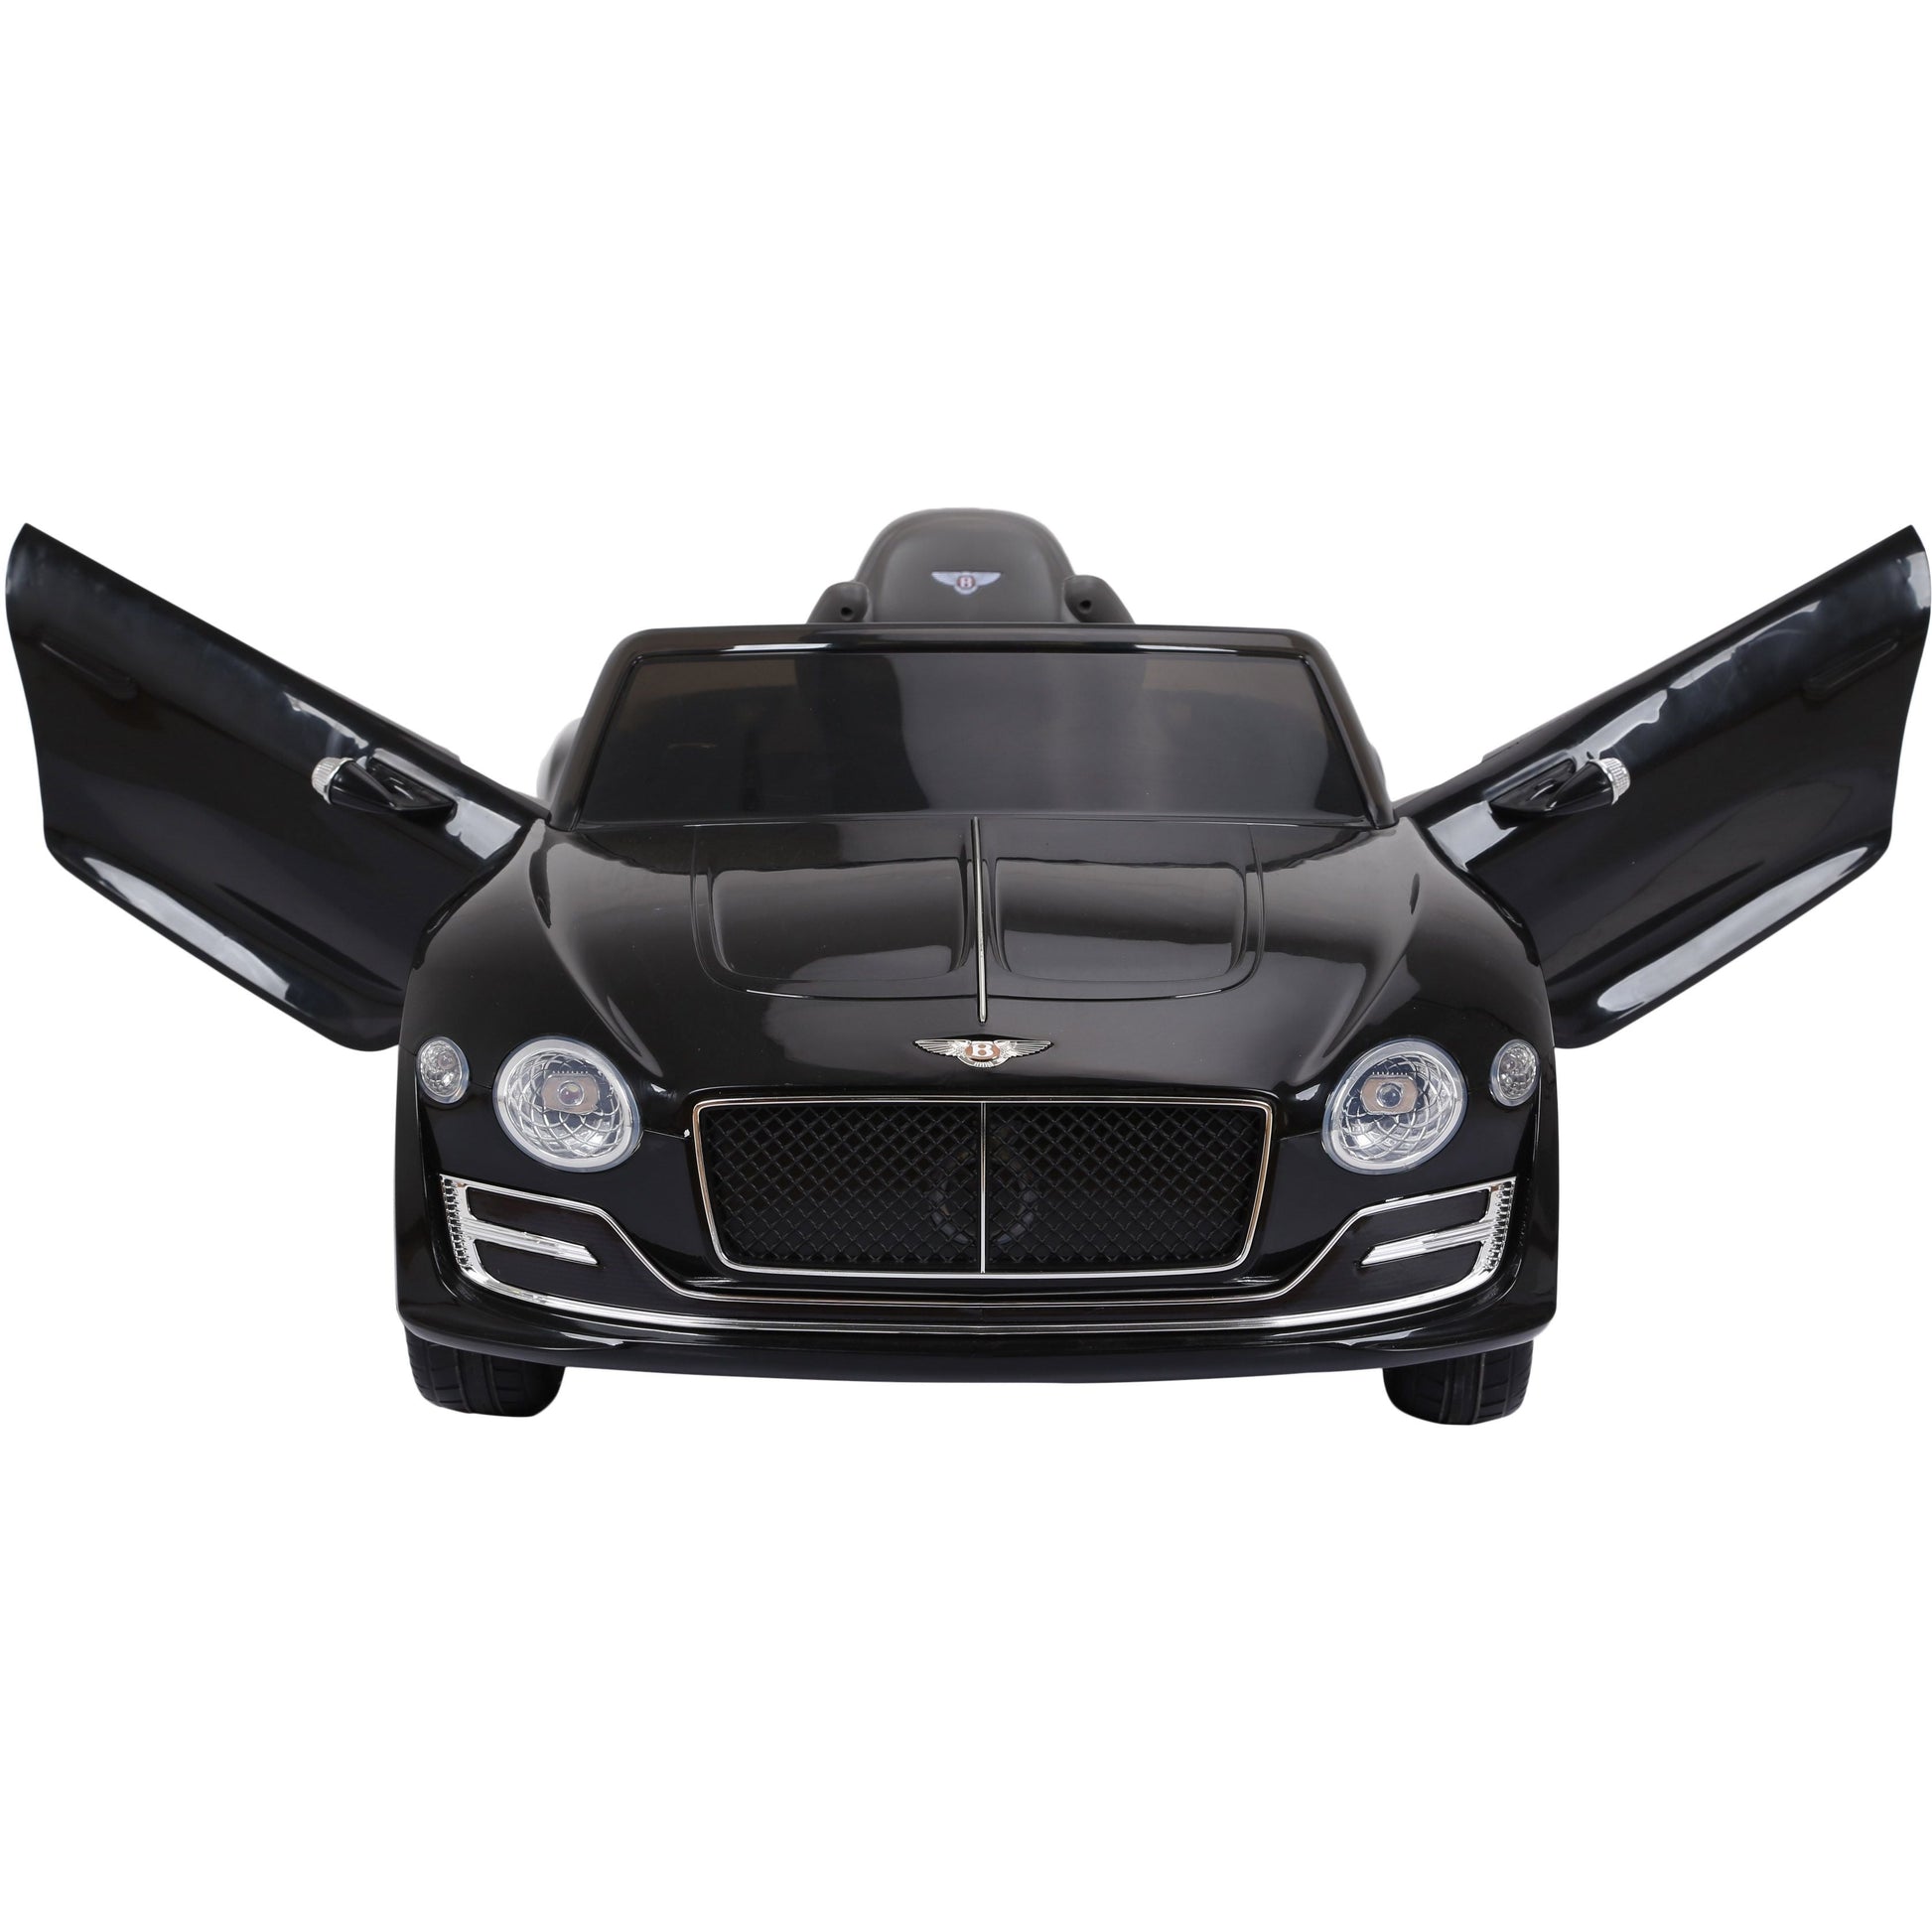 Black Bentley GT EXP12 electric ride-on car for kids with gullwing doors open